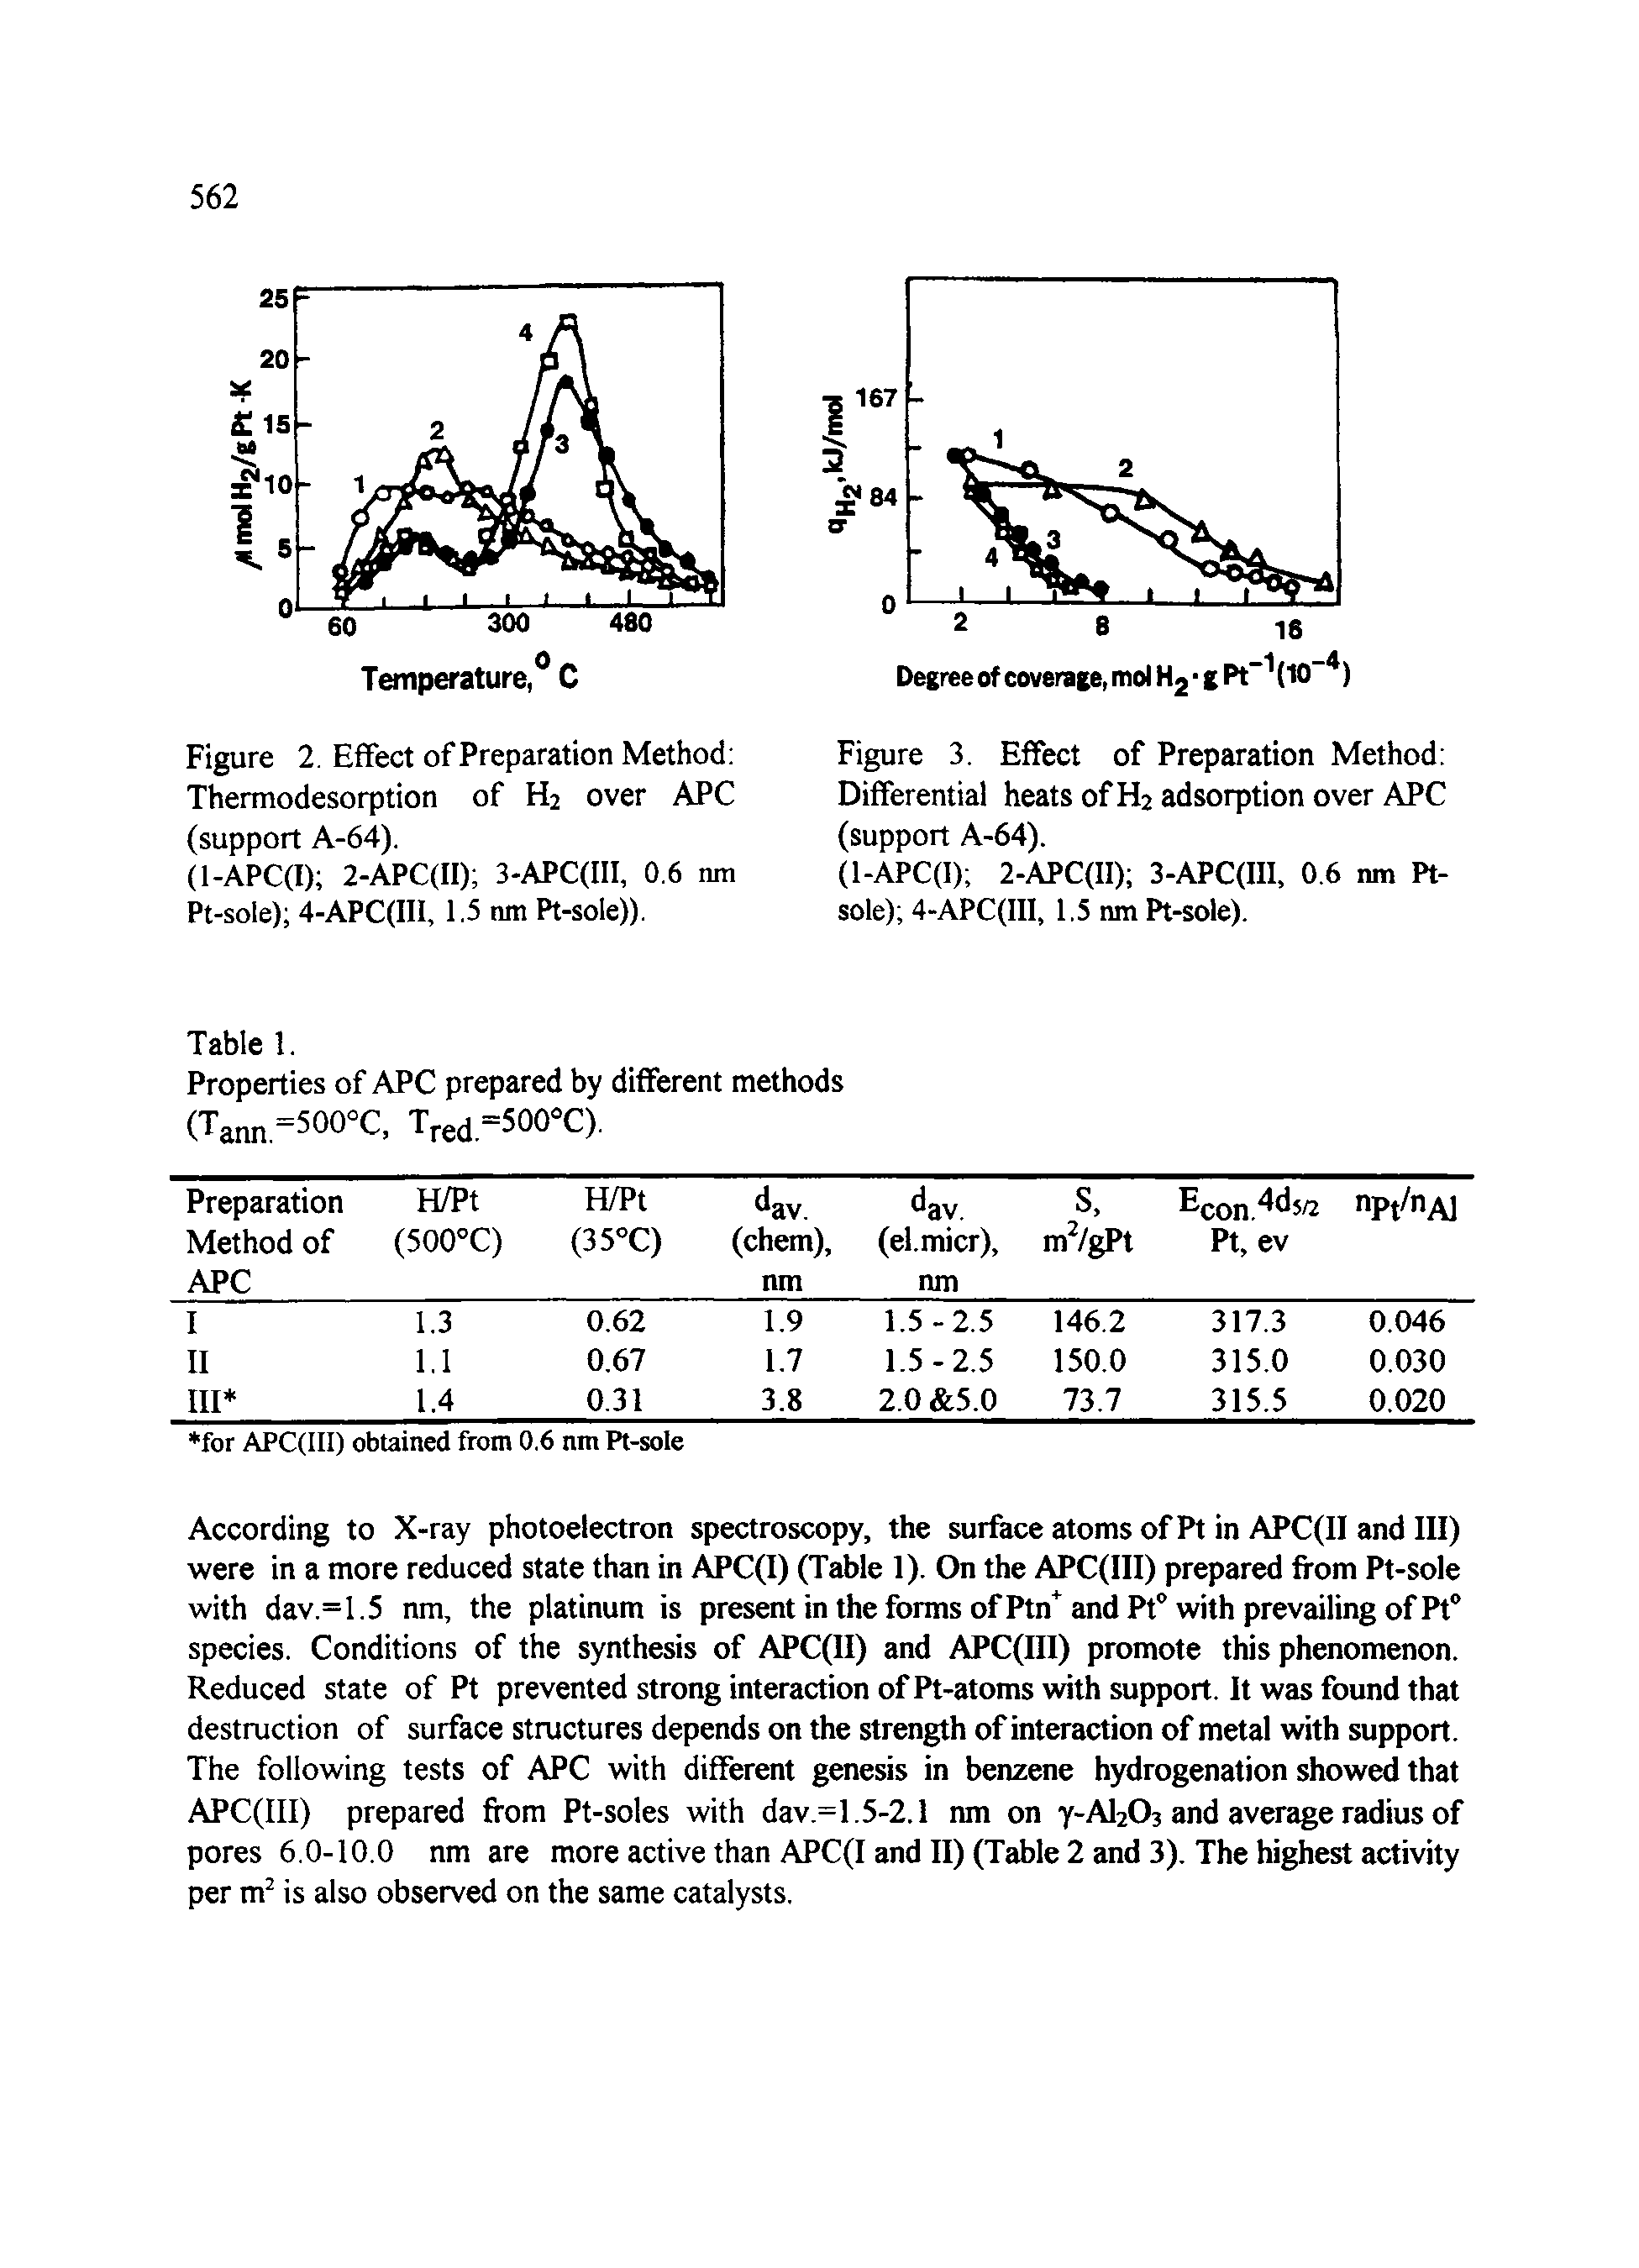 Figure 2. Effect of Preparation Method Thermodesorption of H2 over APC (support A-64).